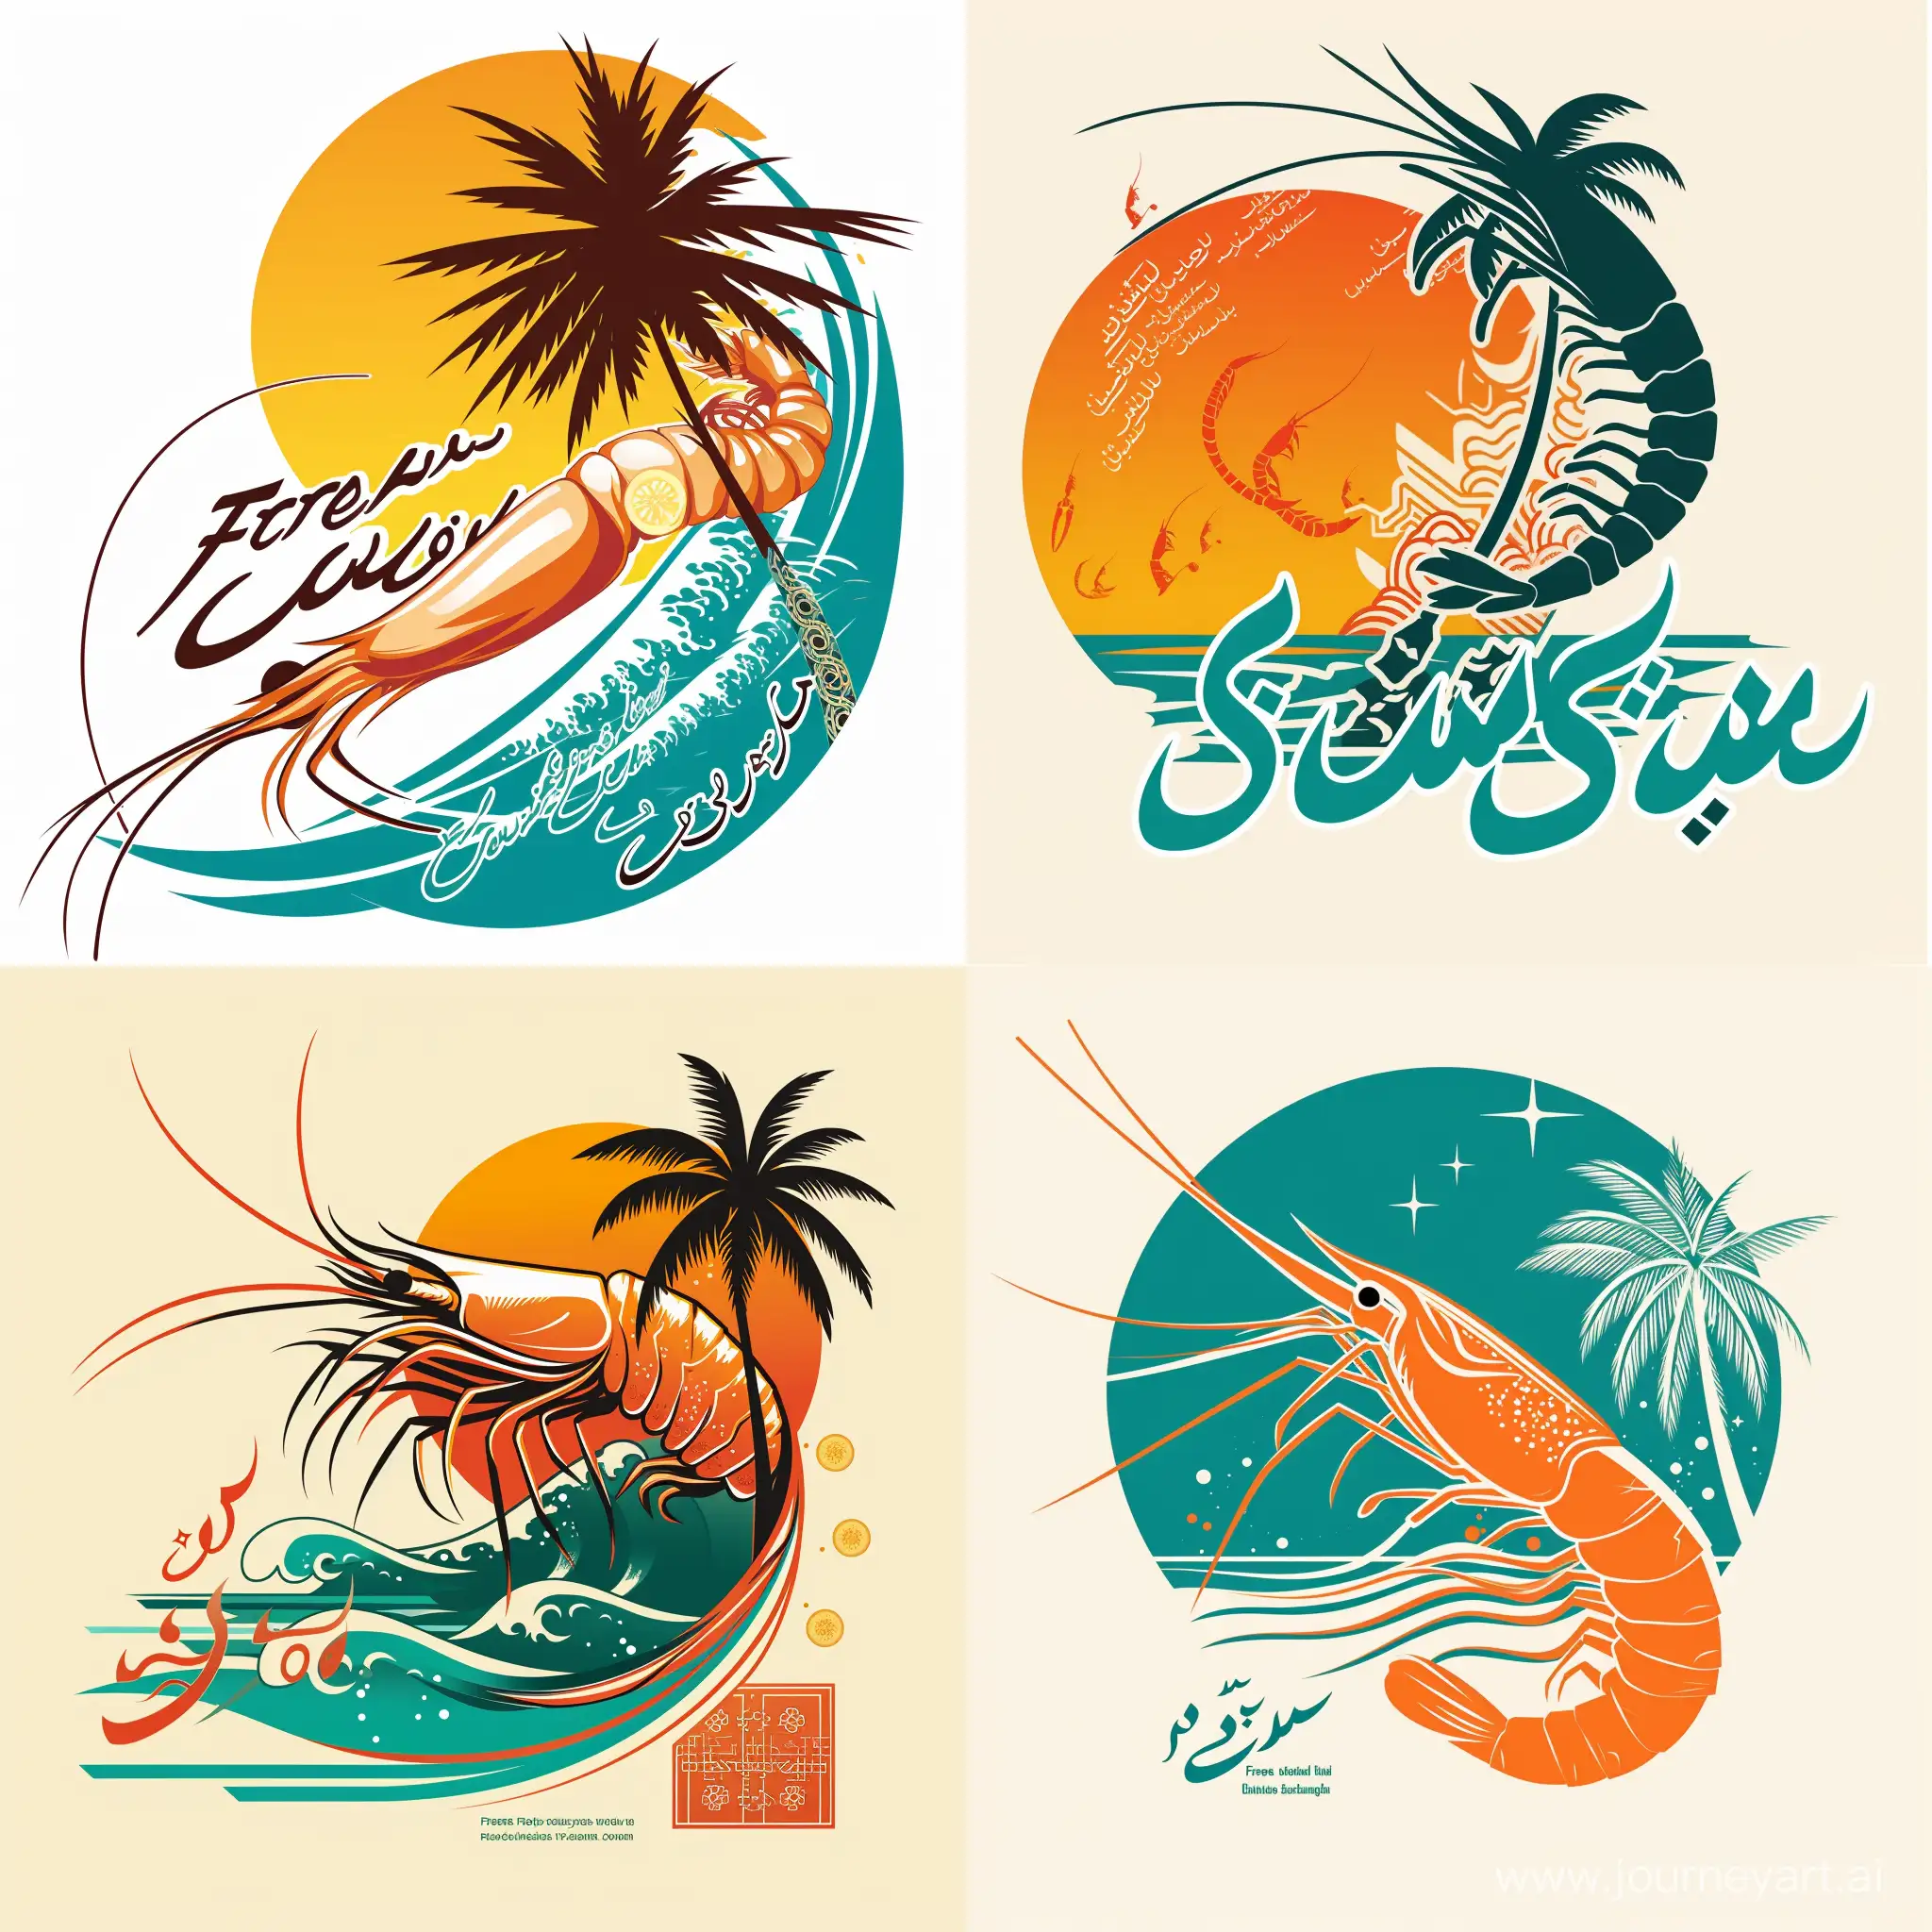 Unique-Shrimp-Growing-Company-Logo-Designs-Inspired-by-Southern-Iran